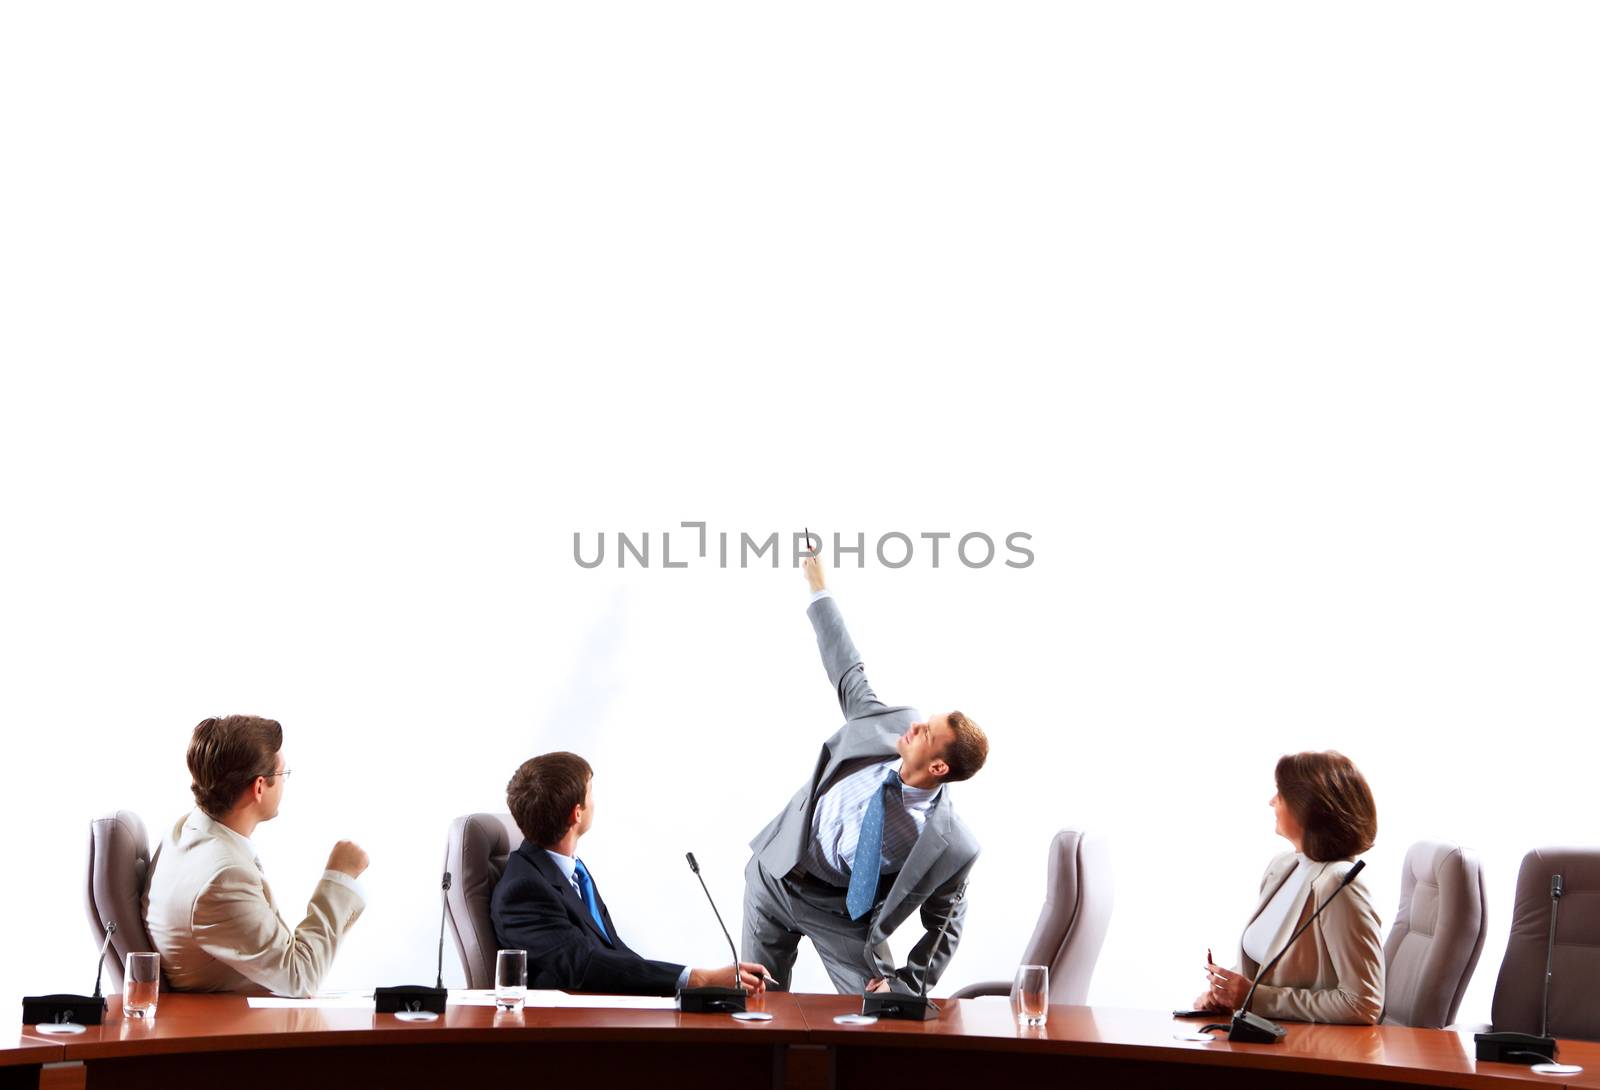 Image of businesspeople at presentation looking at screen. Space for advertisment